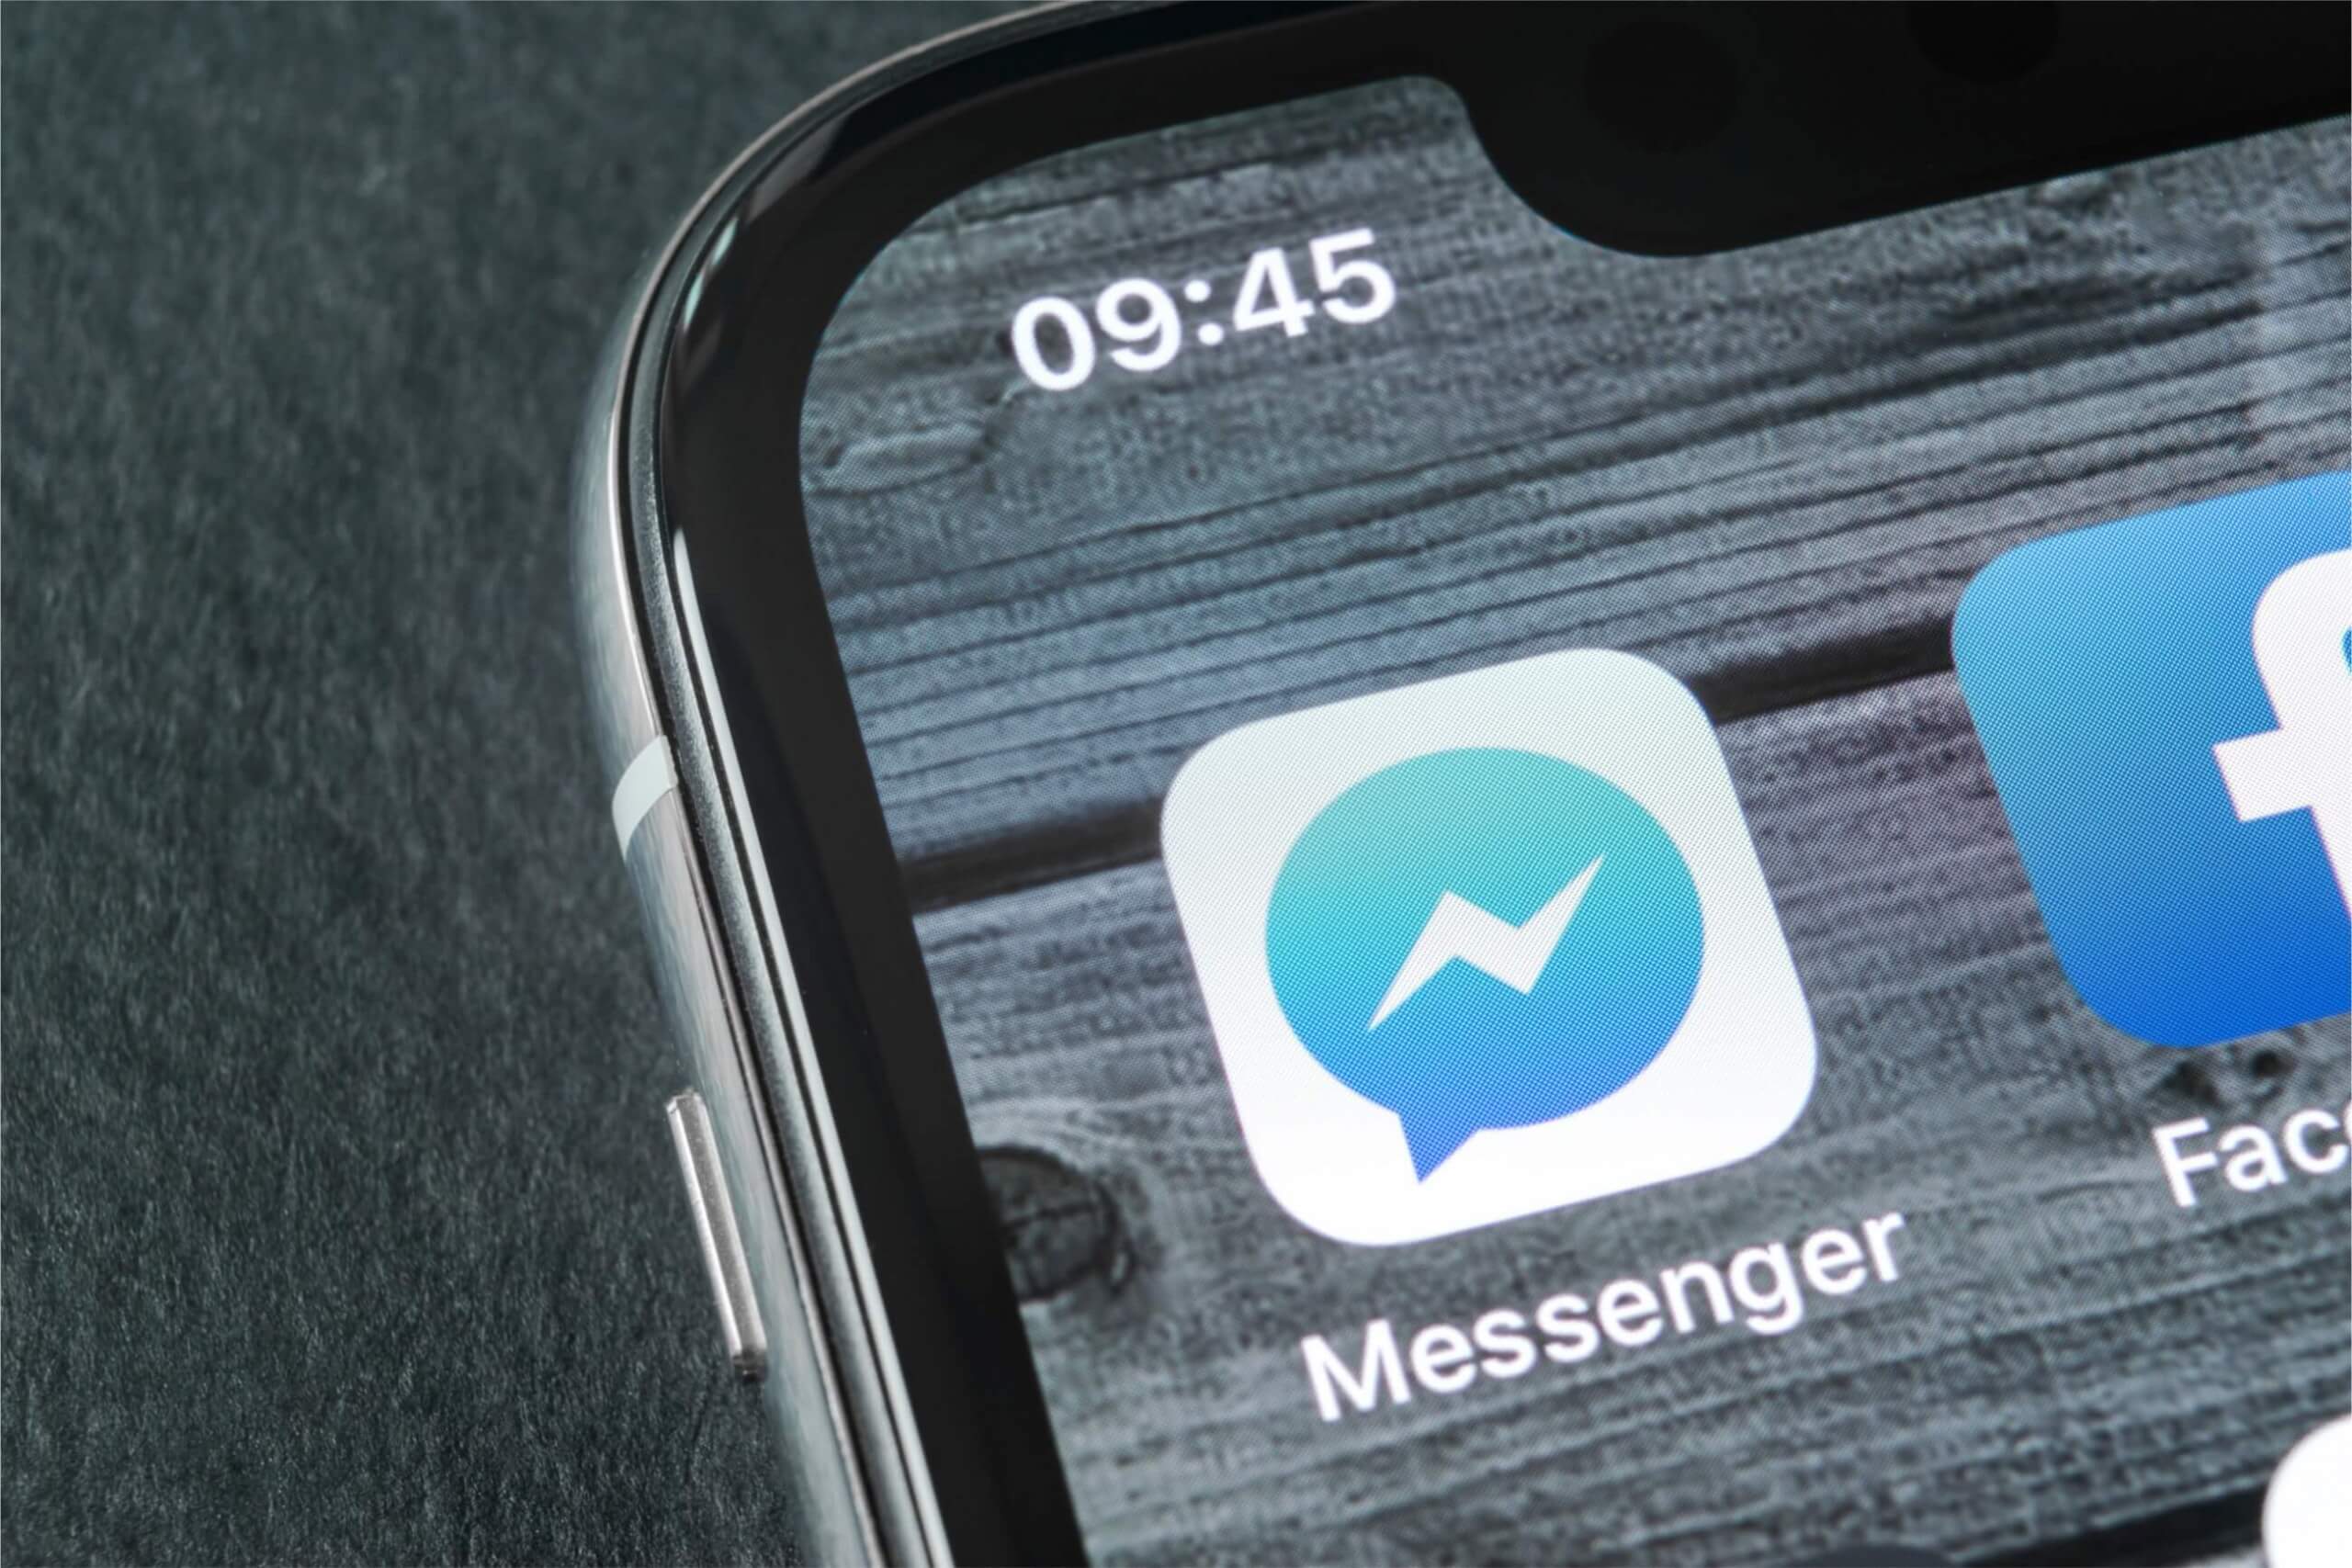 You can no longer sign up for Messenger without a Facebook account